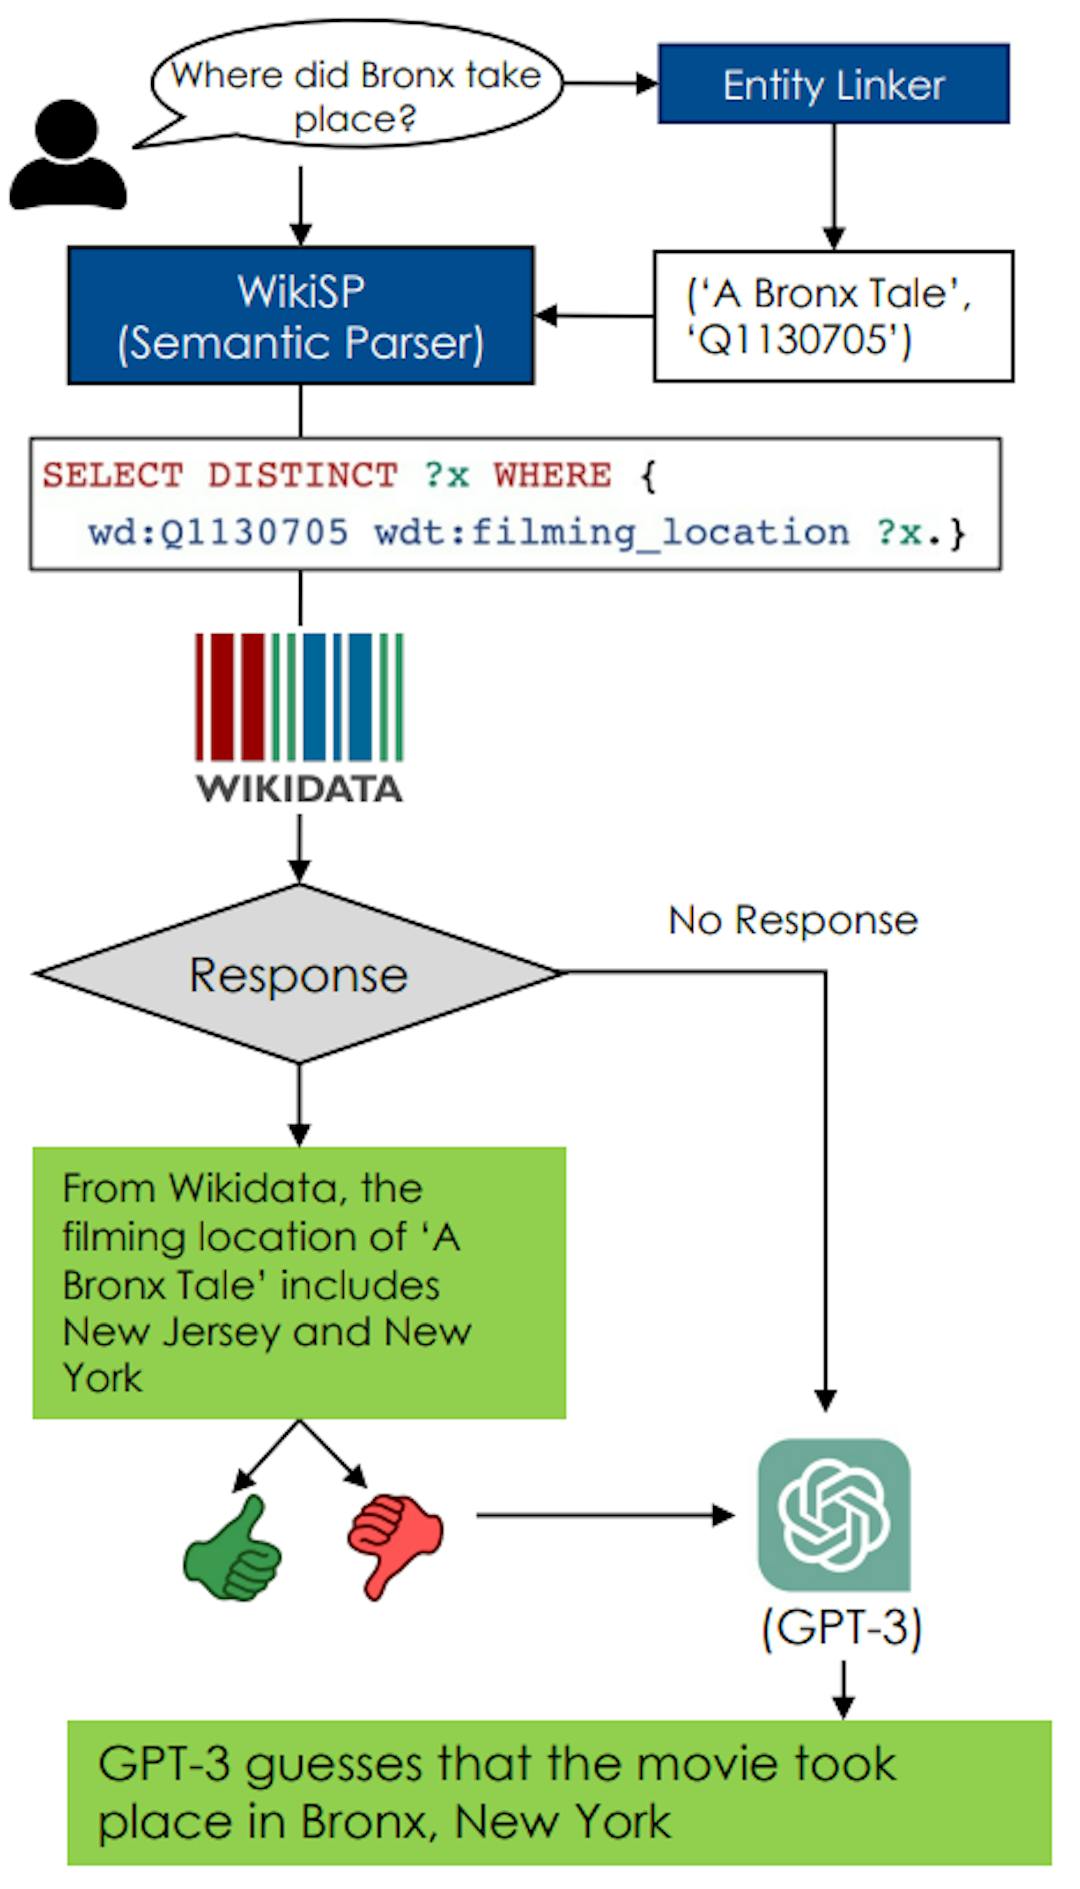 Figure 1: An Overview of WikiSP. An entity linker is used to link entities in the user query to their unique ID in Wikidata; e.g. “A Bronx Tale” is linked to entity ID “Q1130705”. The query and entity linker outputs are fed to the WikiSP semantic parser to produce a modified version of SPARQL, where property IDs (e.g. “P915”) are replaced by their unique string identifiers (e.g. “filming_location”). If applying the query to Wikidata fails to return a result, we default to GPT-3, labeling the result as a GPT-3 guess. Returned answers are presented in the context of the query, so the user can tell if the answer is acceptable; if not, we also show the guess from GPT-3. Here WikiSP mistakenly uses “filming_location” instead of “narrative_location”; the user detects the mistake, thumbs down the answer, and the GPT-3 answer is provided.